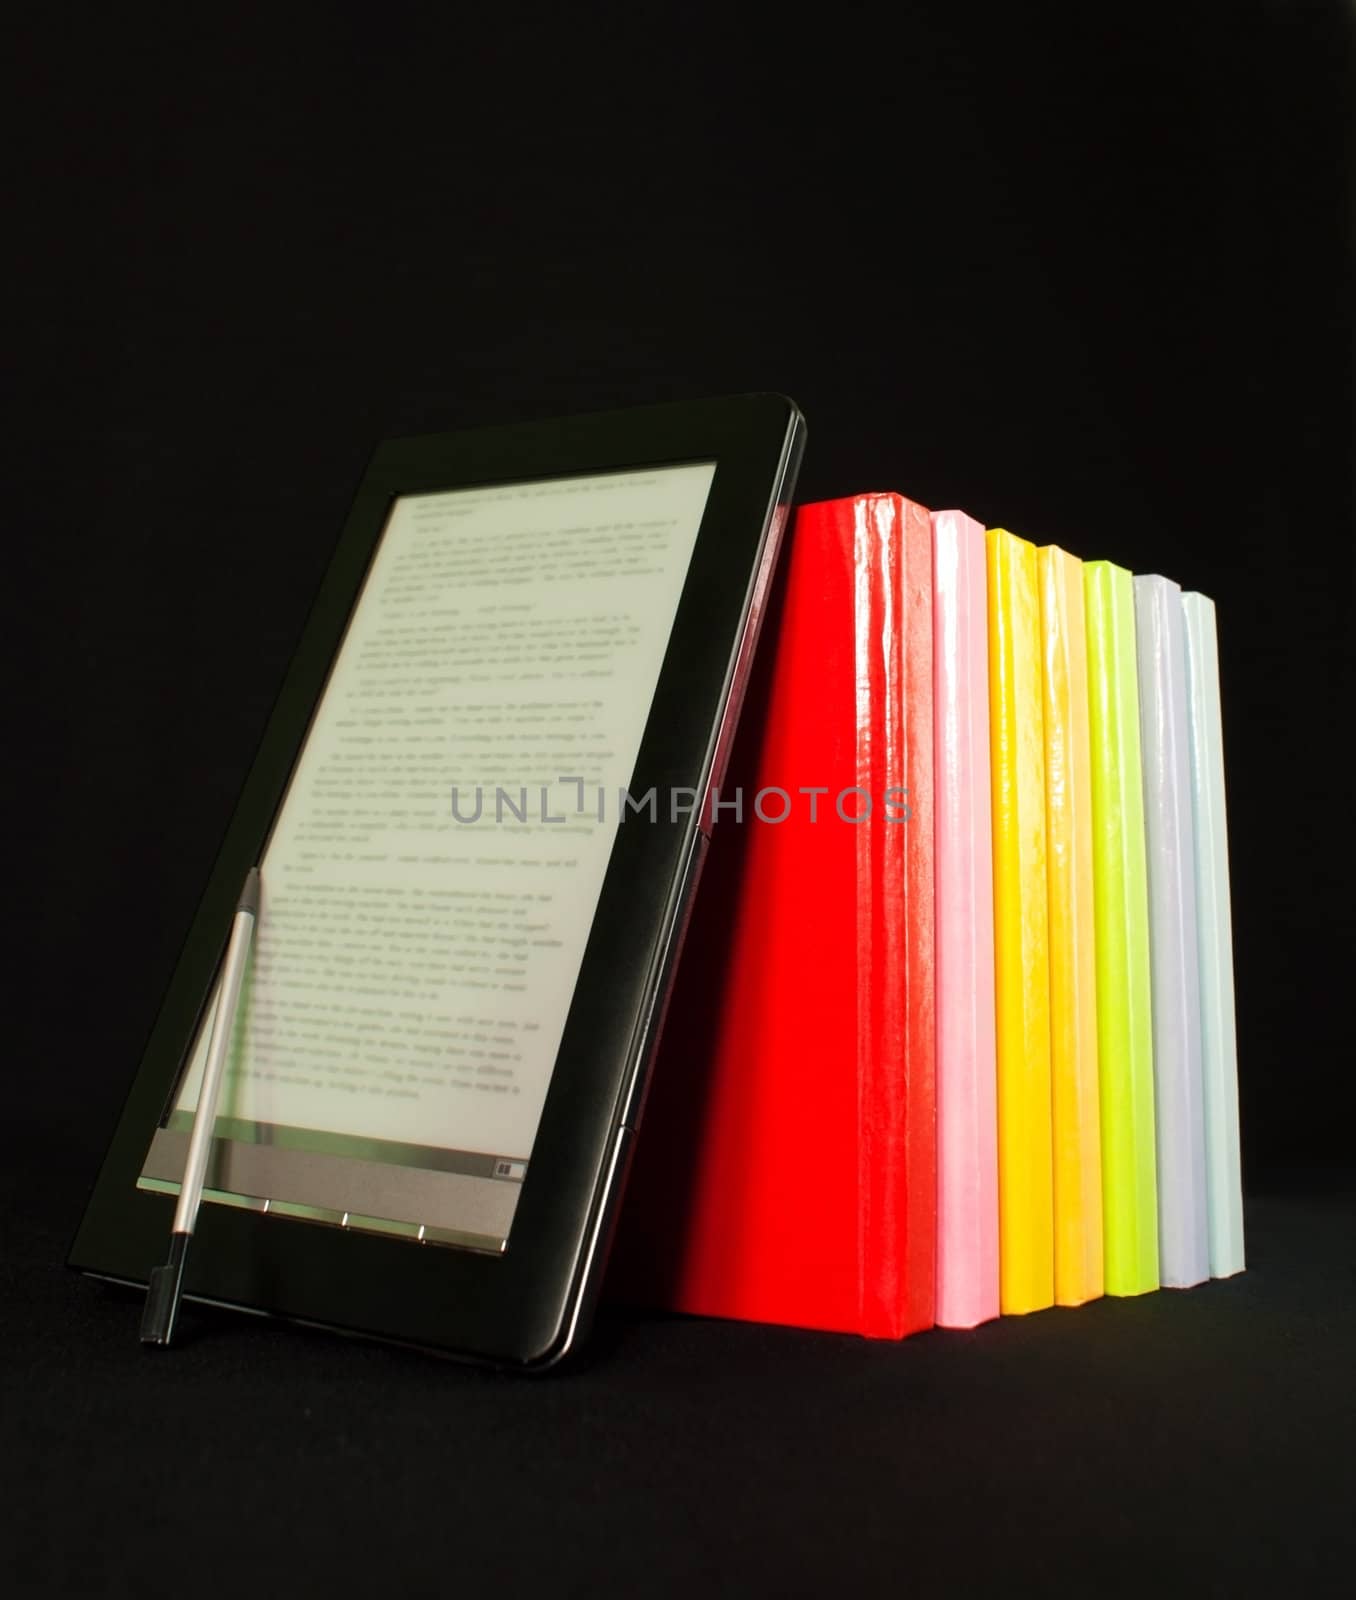 Row of colorful books and electronic book reader on the black background